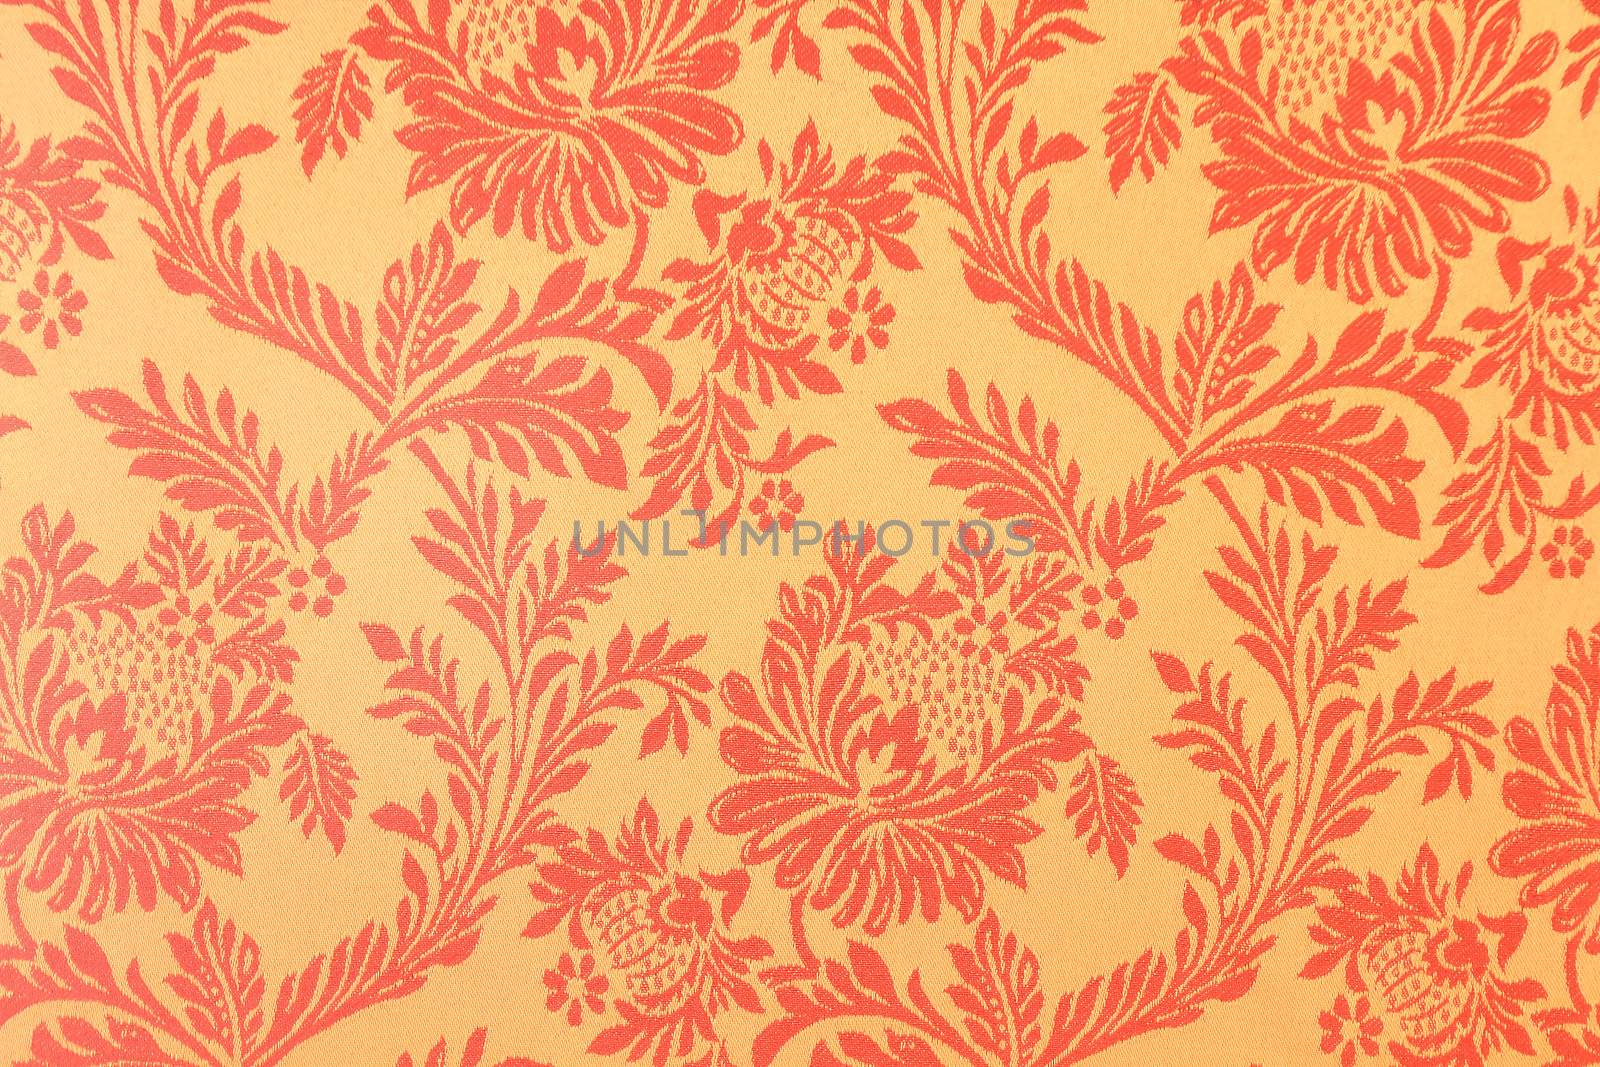 pattern with gold abstract flowers on a red background